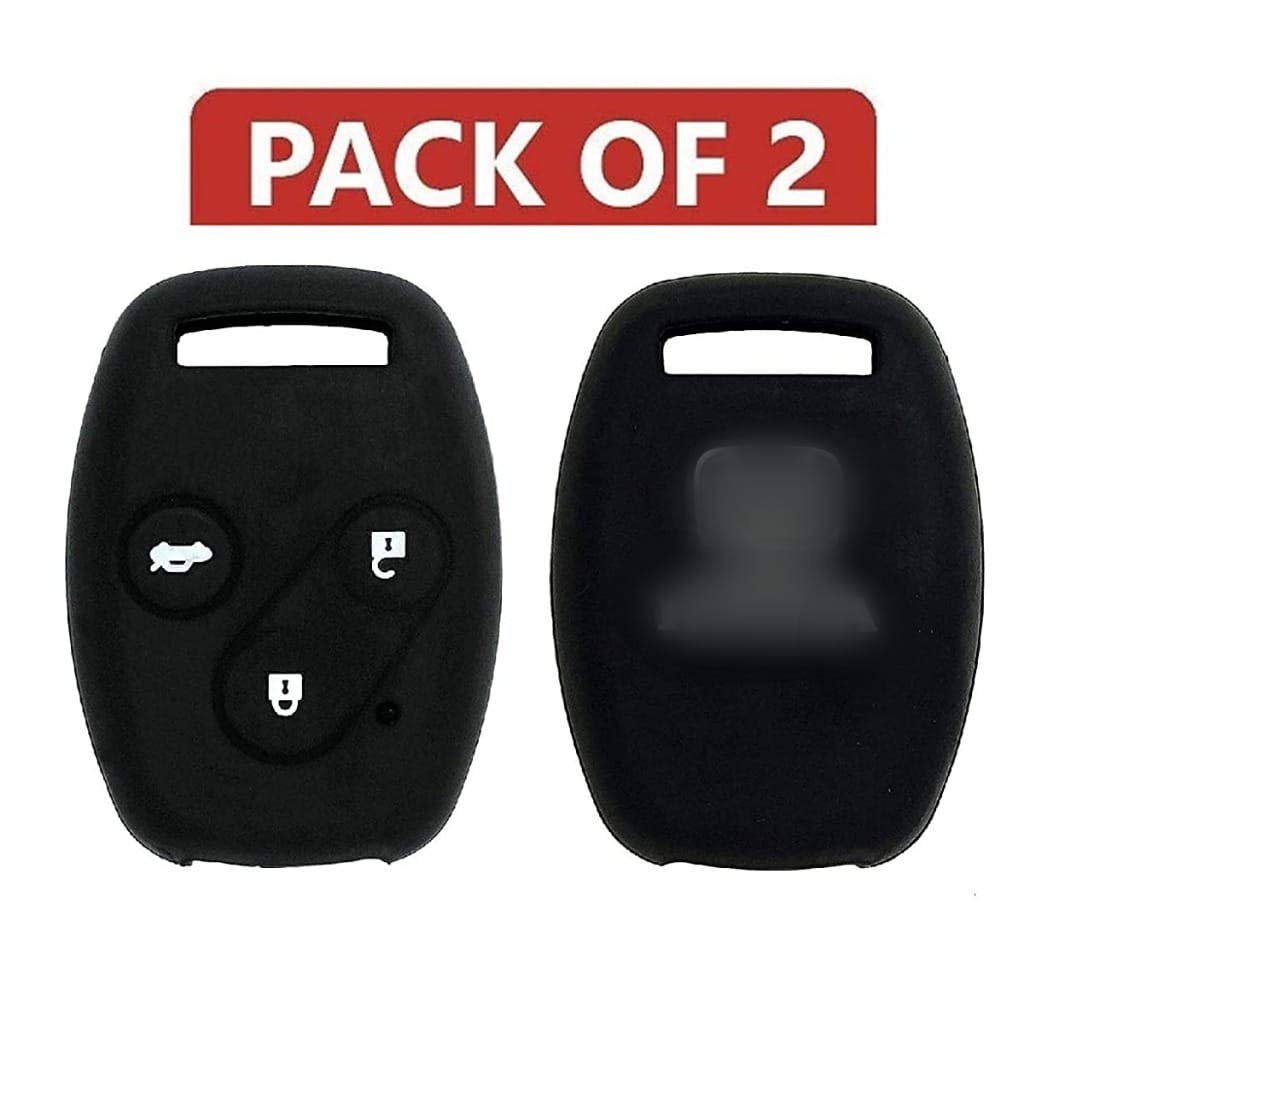 Silicone Key Cover Compatible with 3 Button Key Honda Accord (Pack of 2) Image 